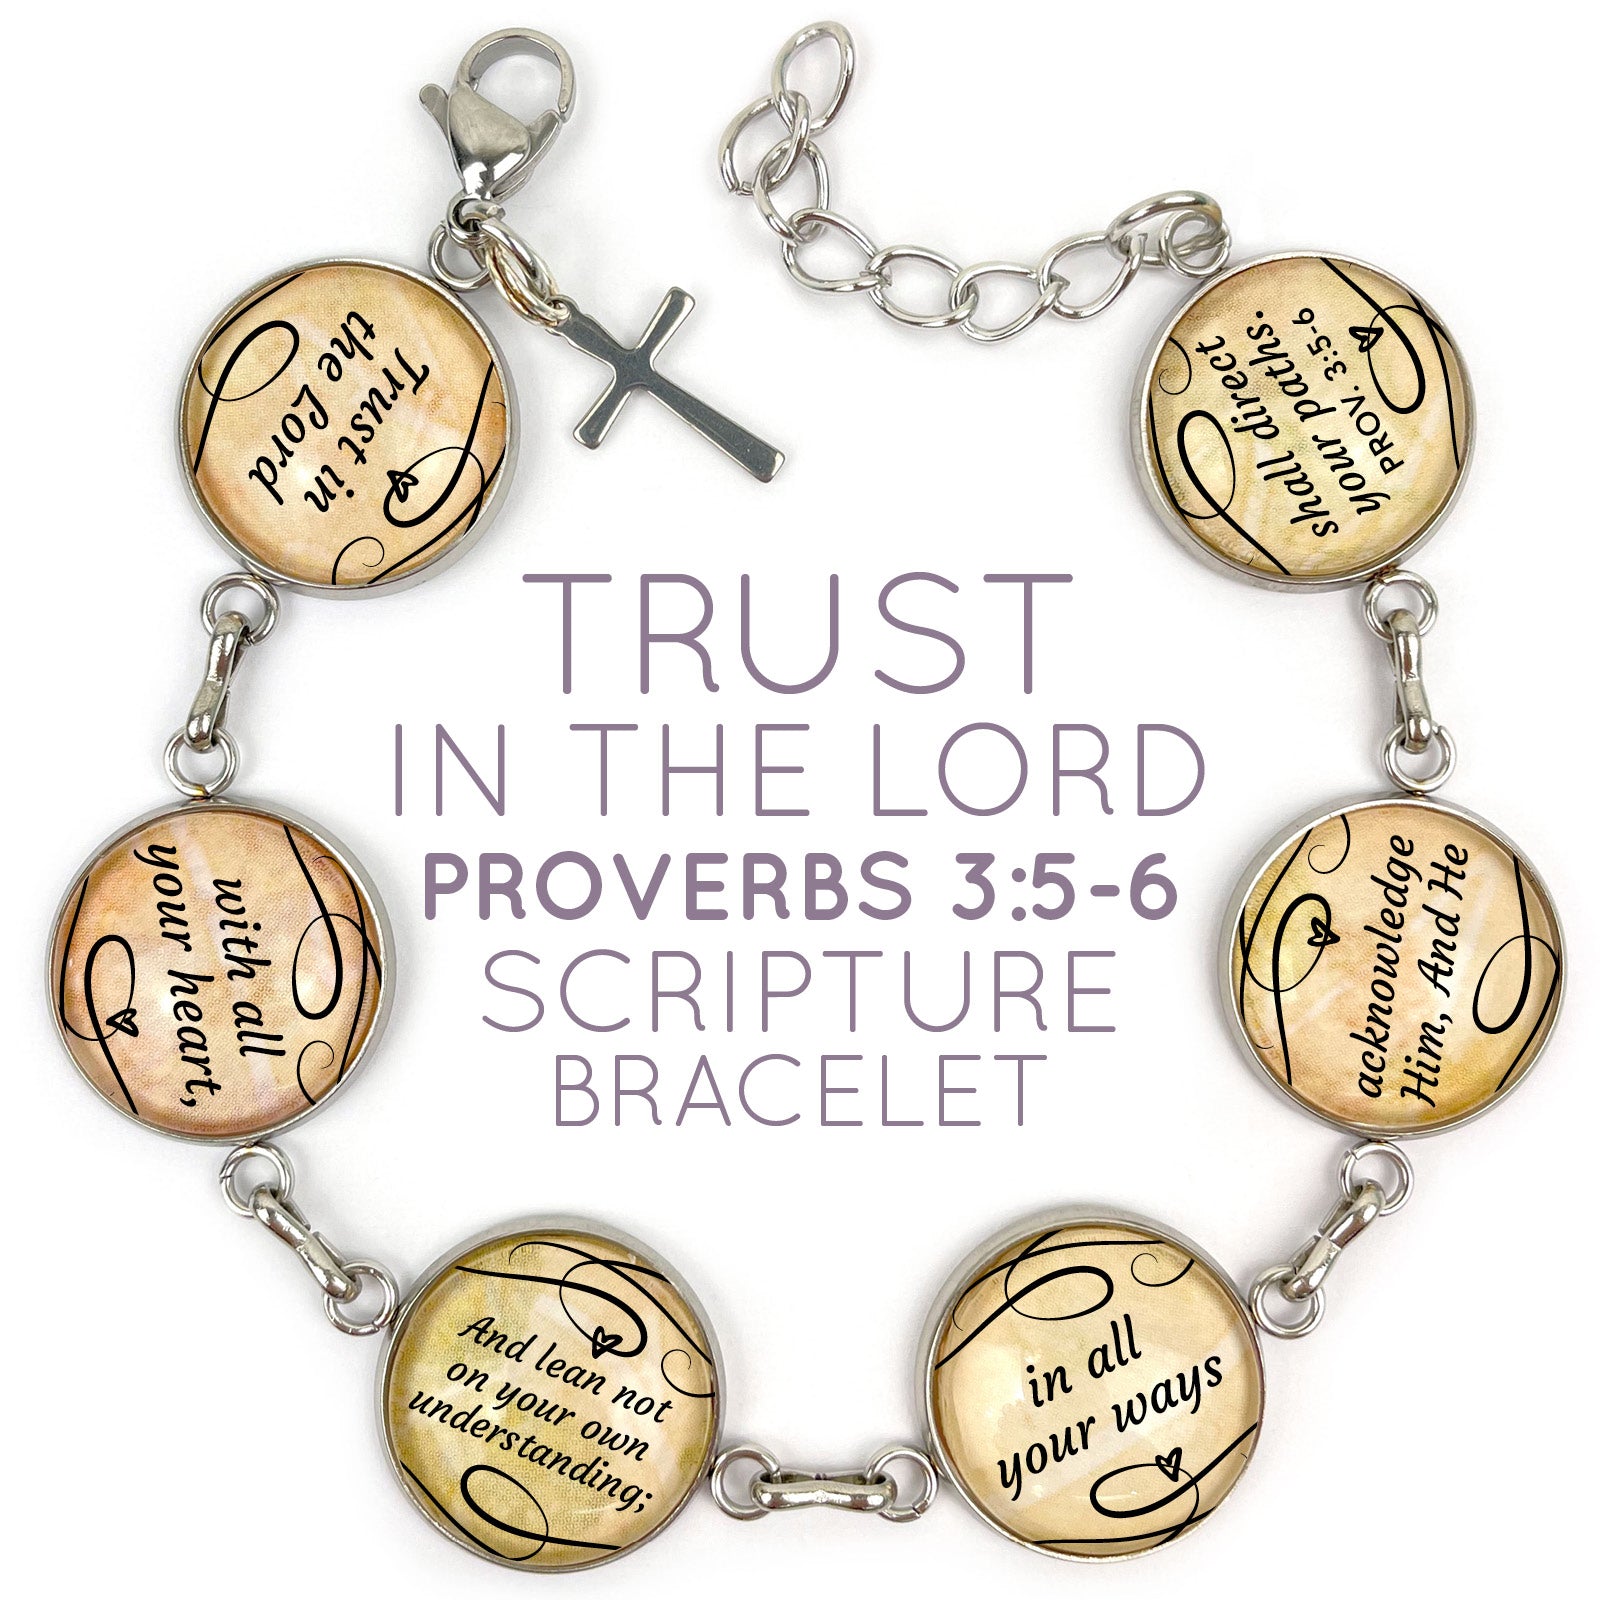 "Trust In The Lord" Proverbs 3:5-6 Scripture Bracelet